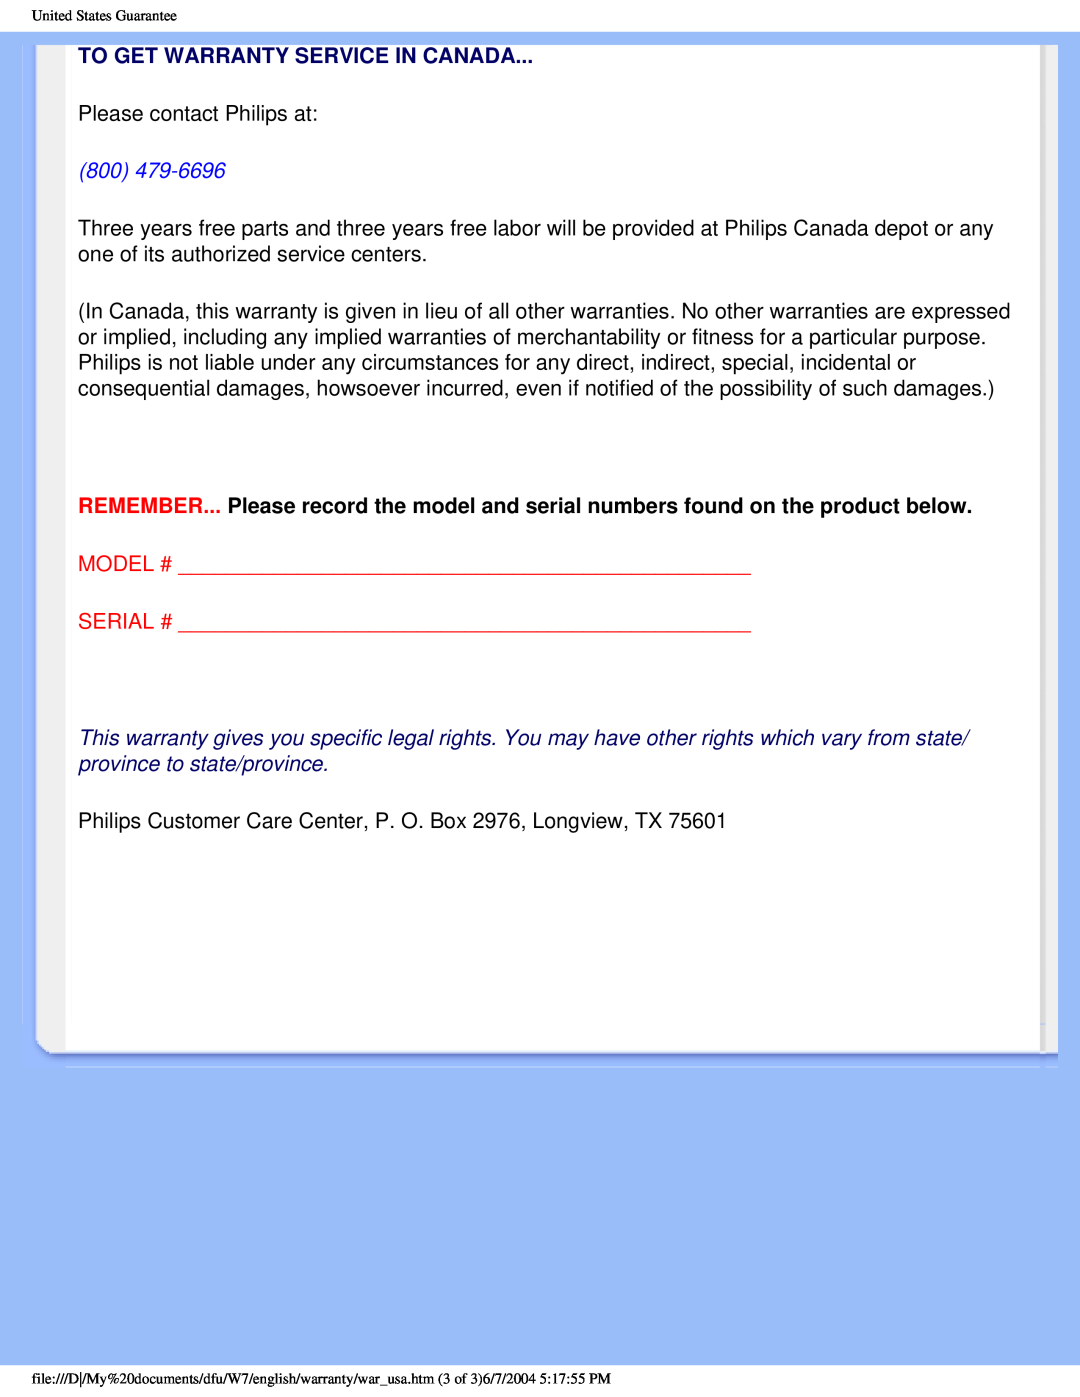 Philips 170B5 user manual To Get Warranty Service In Canada 